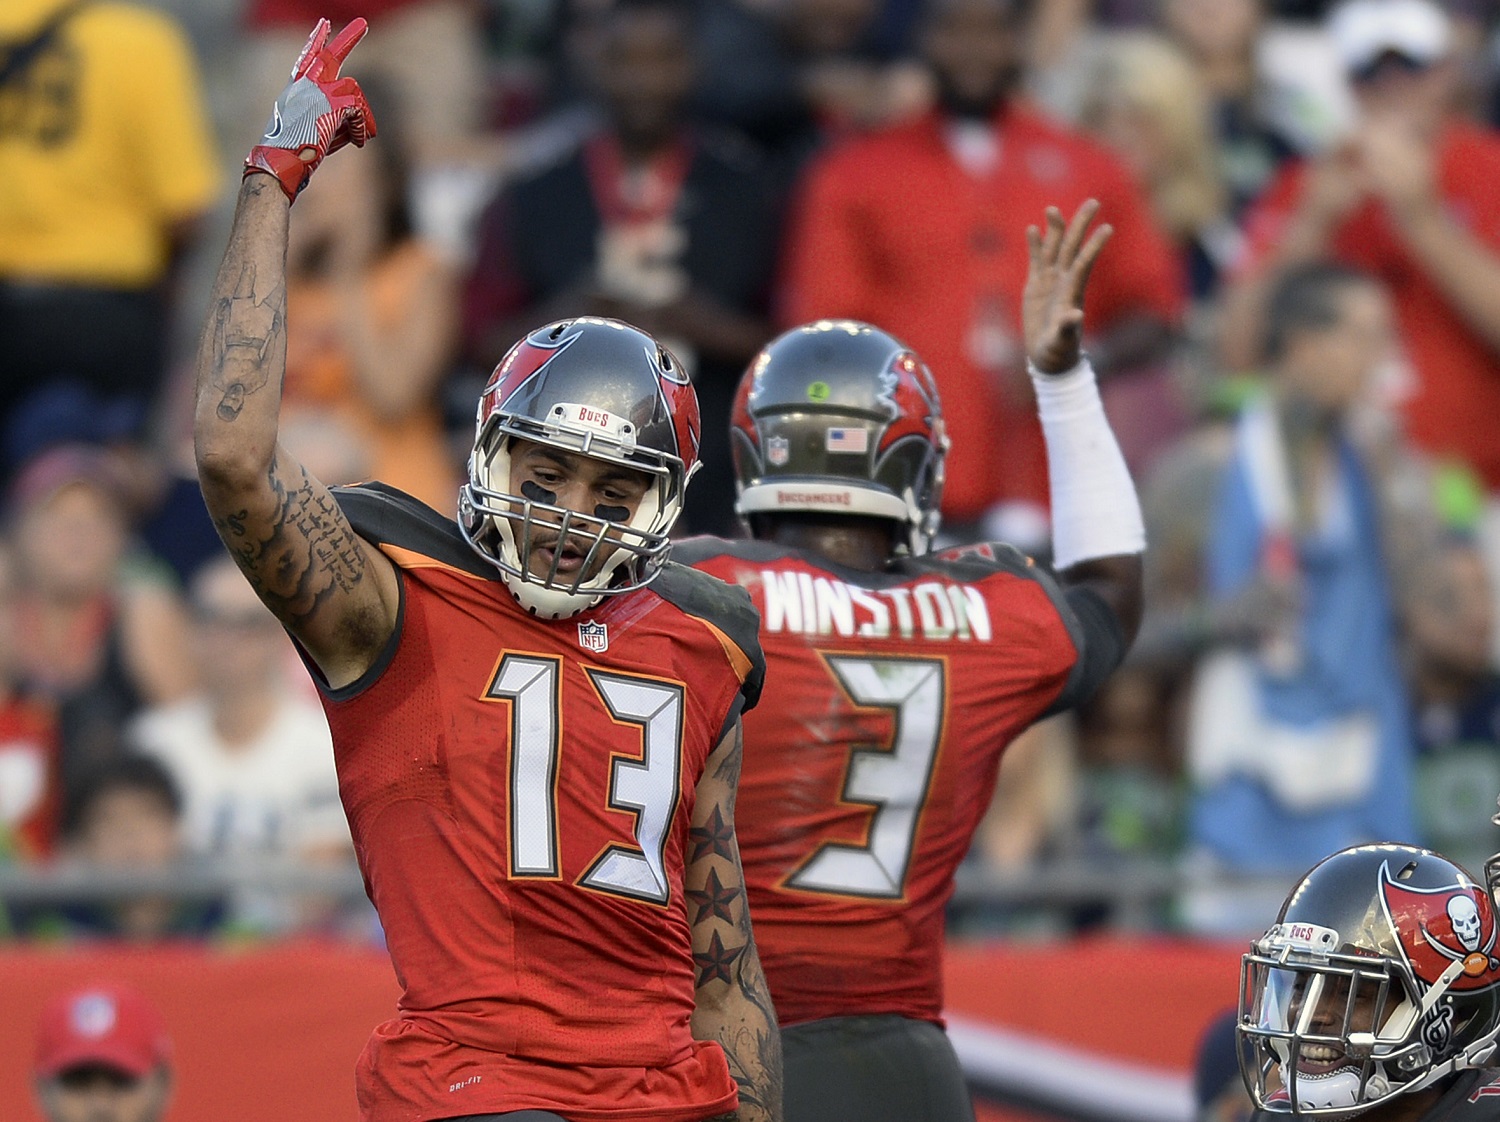 Tampa Bay Buccaneers wide receiver Mike Evans (13) celebrates with quarterback Jameis Winston (3) after Evans caught a 23-yard touchdown reception against the Seattle Seahawks during the second quarter of an NFL football game Sunday, Nov. 27, 2016, in Tampa, Fla. (AP Photo/Jason Behnken)